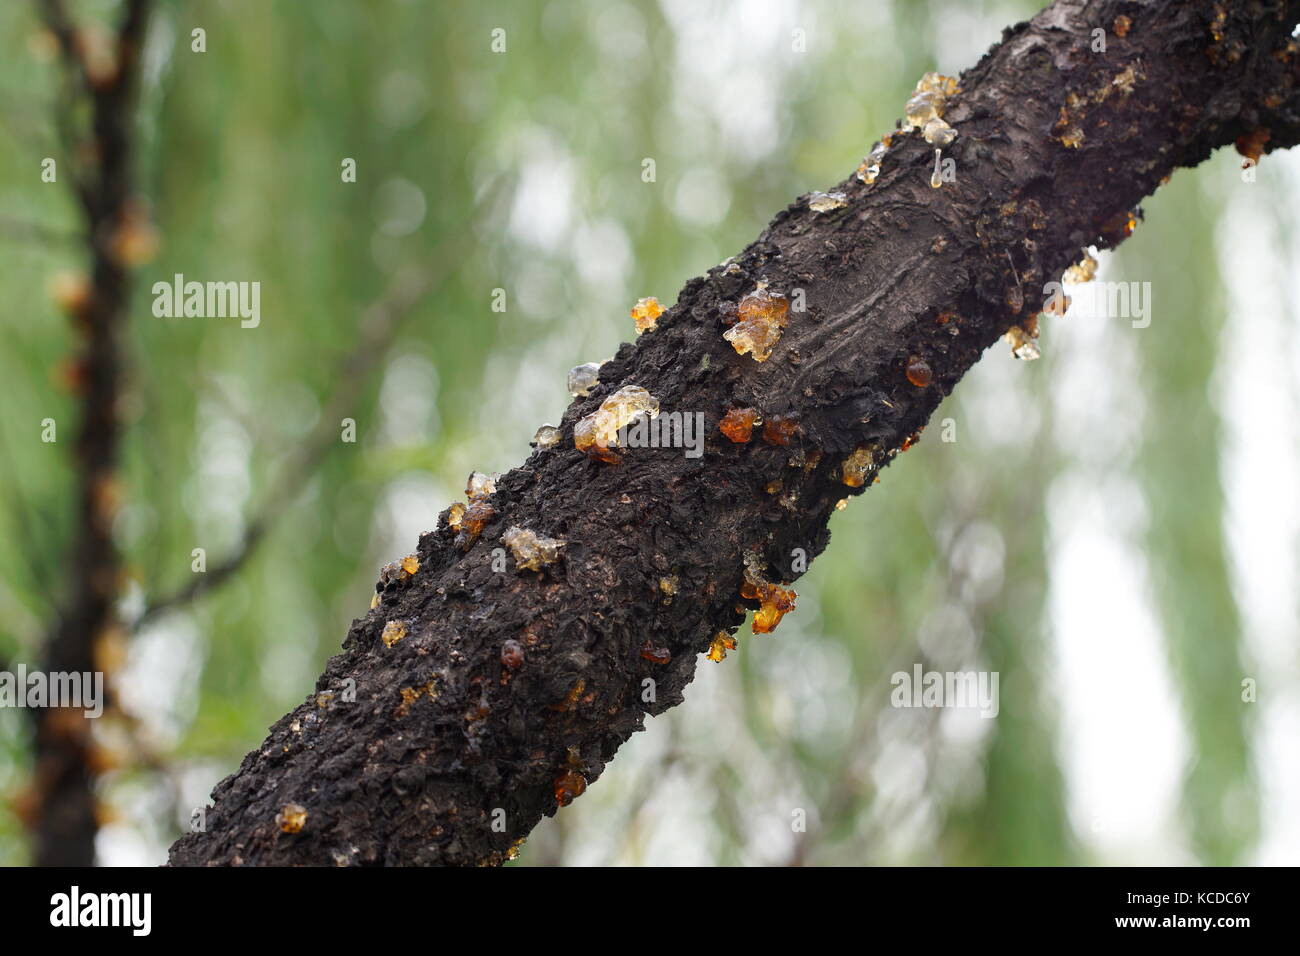 Natural resin secreted from the peach tree, forming amber-like crystals on the tree.  Known as peach gum, it is believed to have medical benefits. Stock Photo